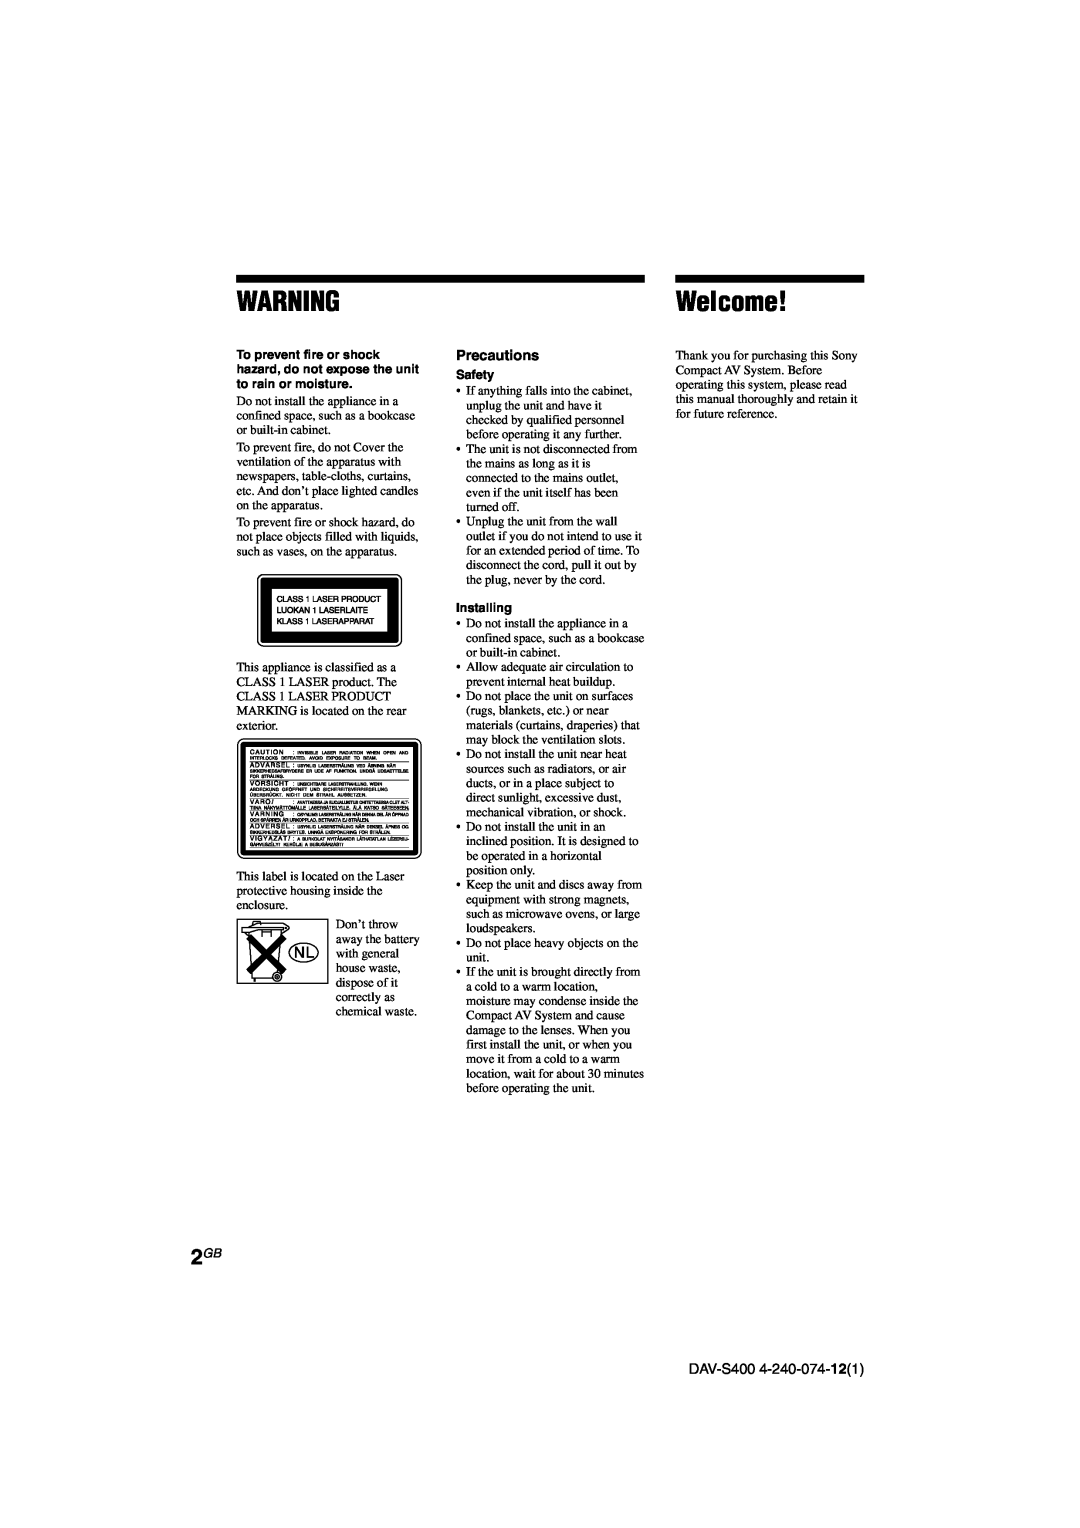 Sony DAV-S400 manual Welcome, Precautions, Safety, Installing 